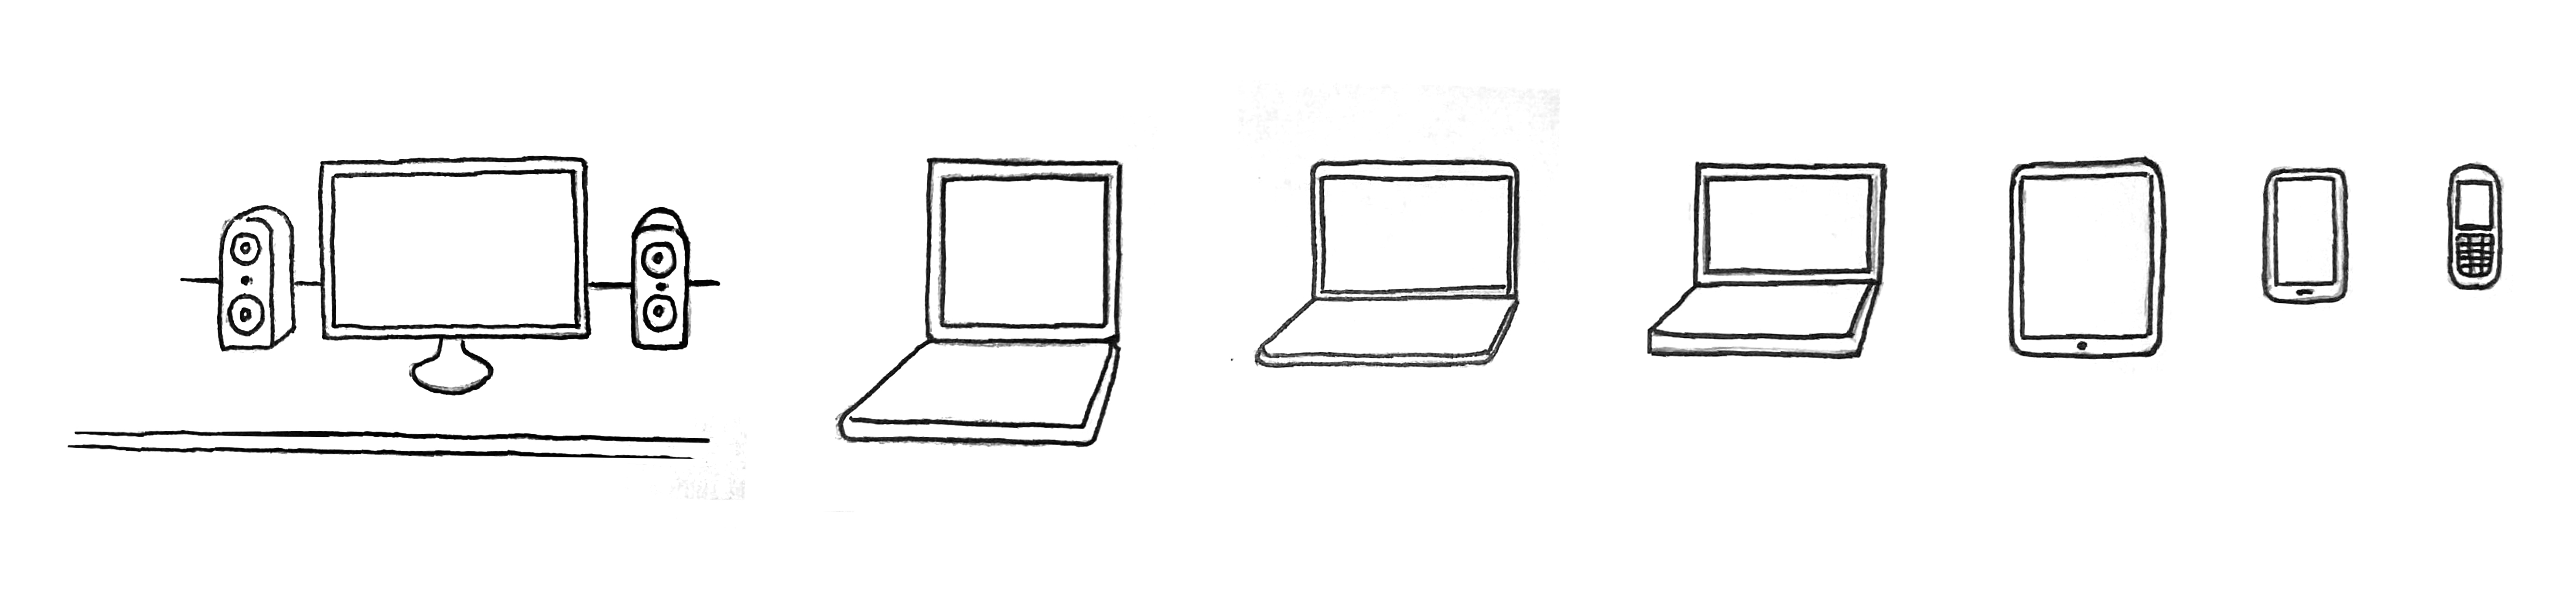 Illustration: A desktop computer, three different laptops, a tablet, a smartphone and a cellphone.